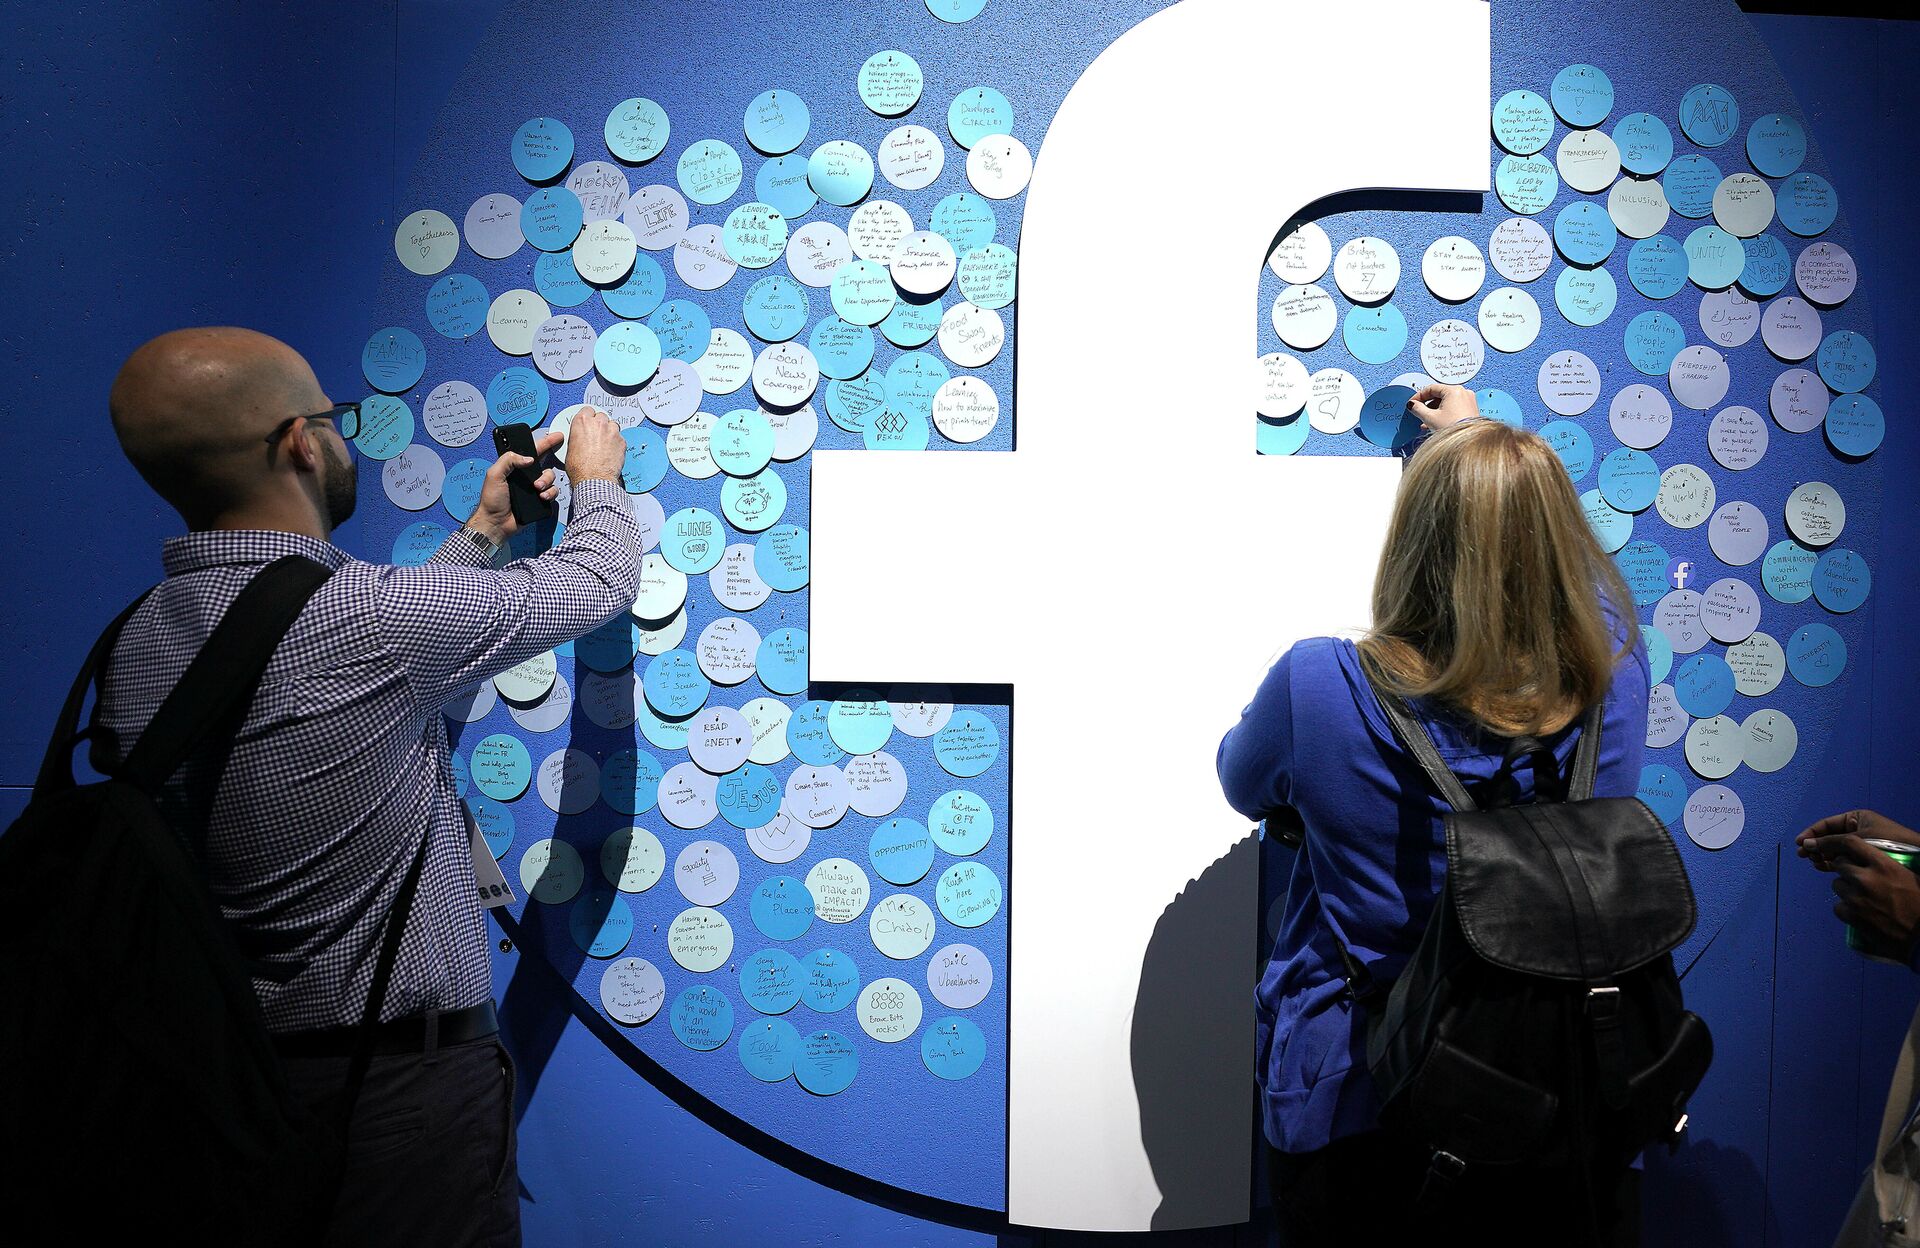 Facebook Unlikely to Get Off With a Whole Skin After Banning National News, UK Observers Say - Sputnik International, 1920, 22.02.2021